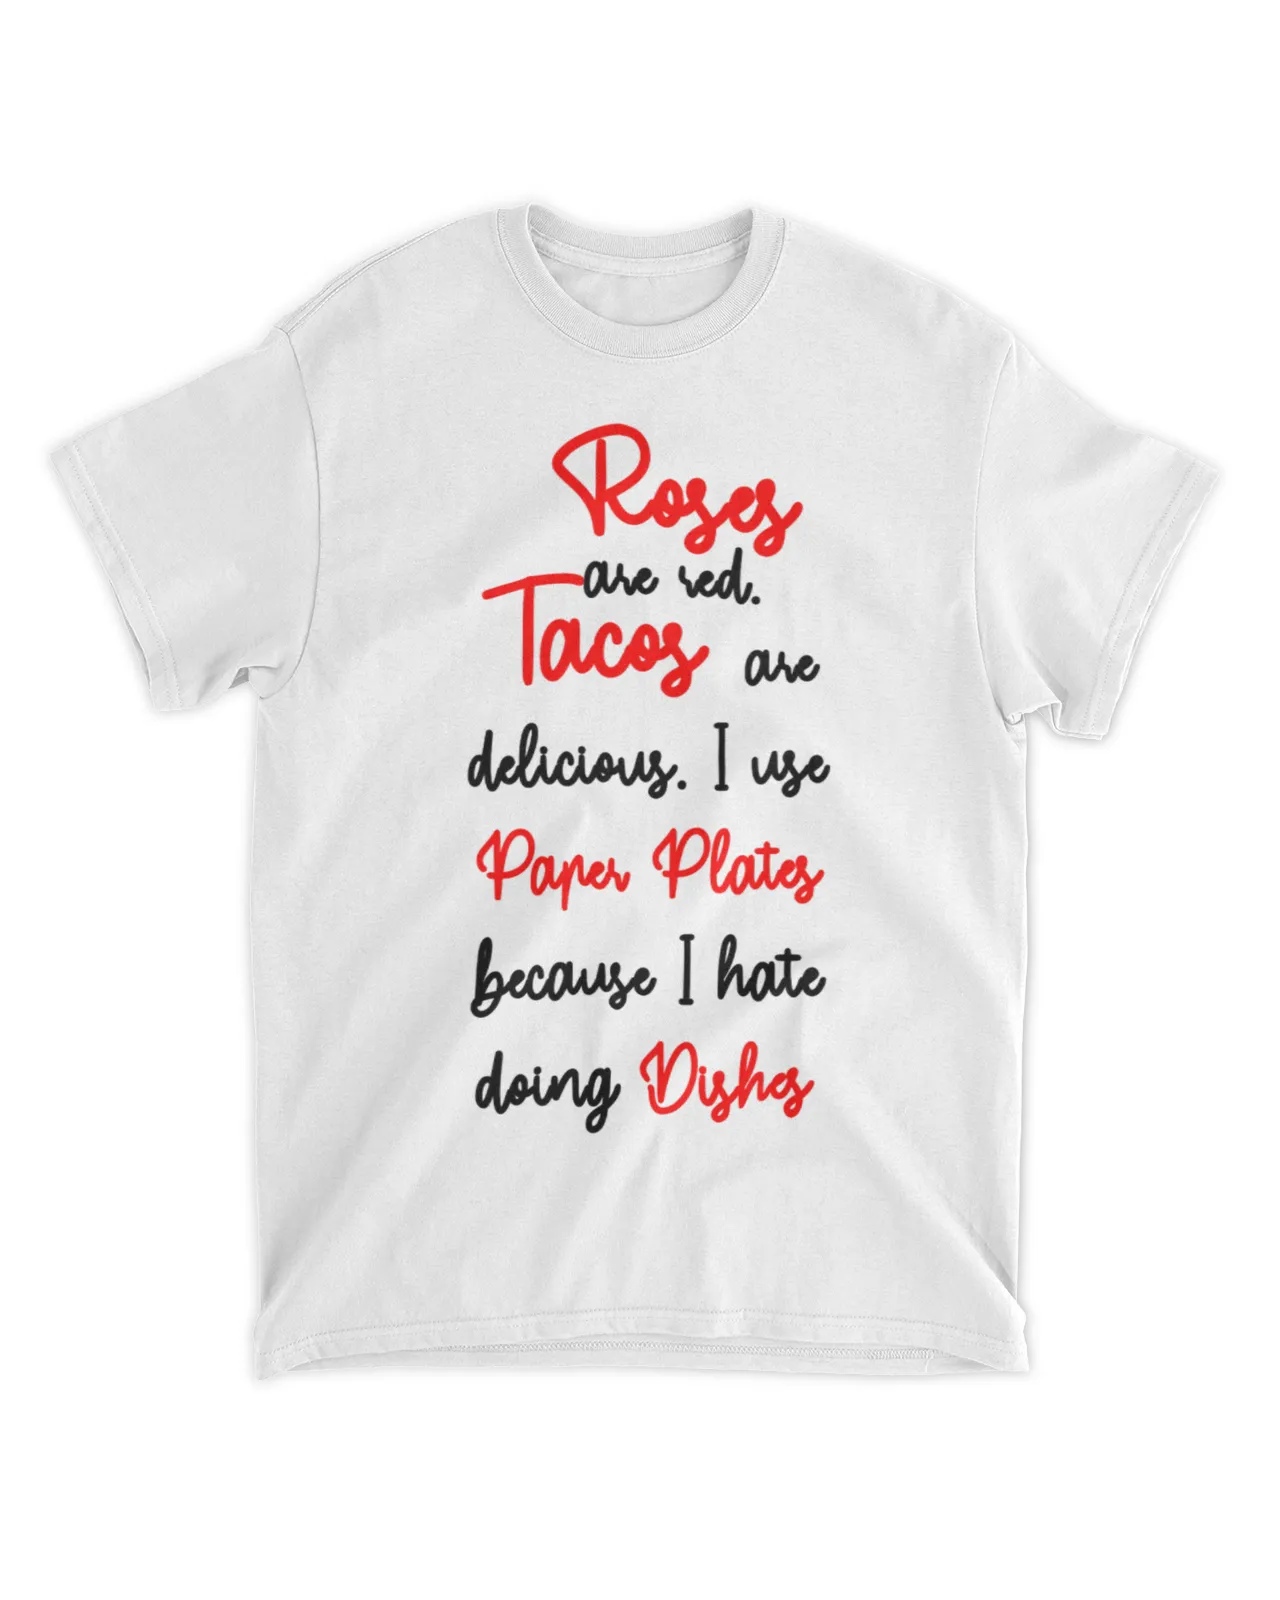  Roses are red Tacos are delicious I use Paper plates because I hate doing Dishes shirt